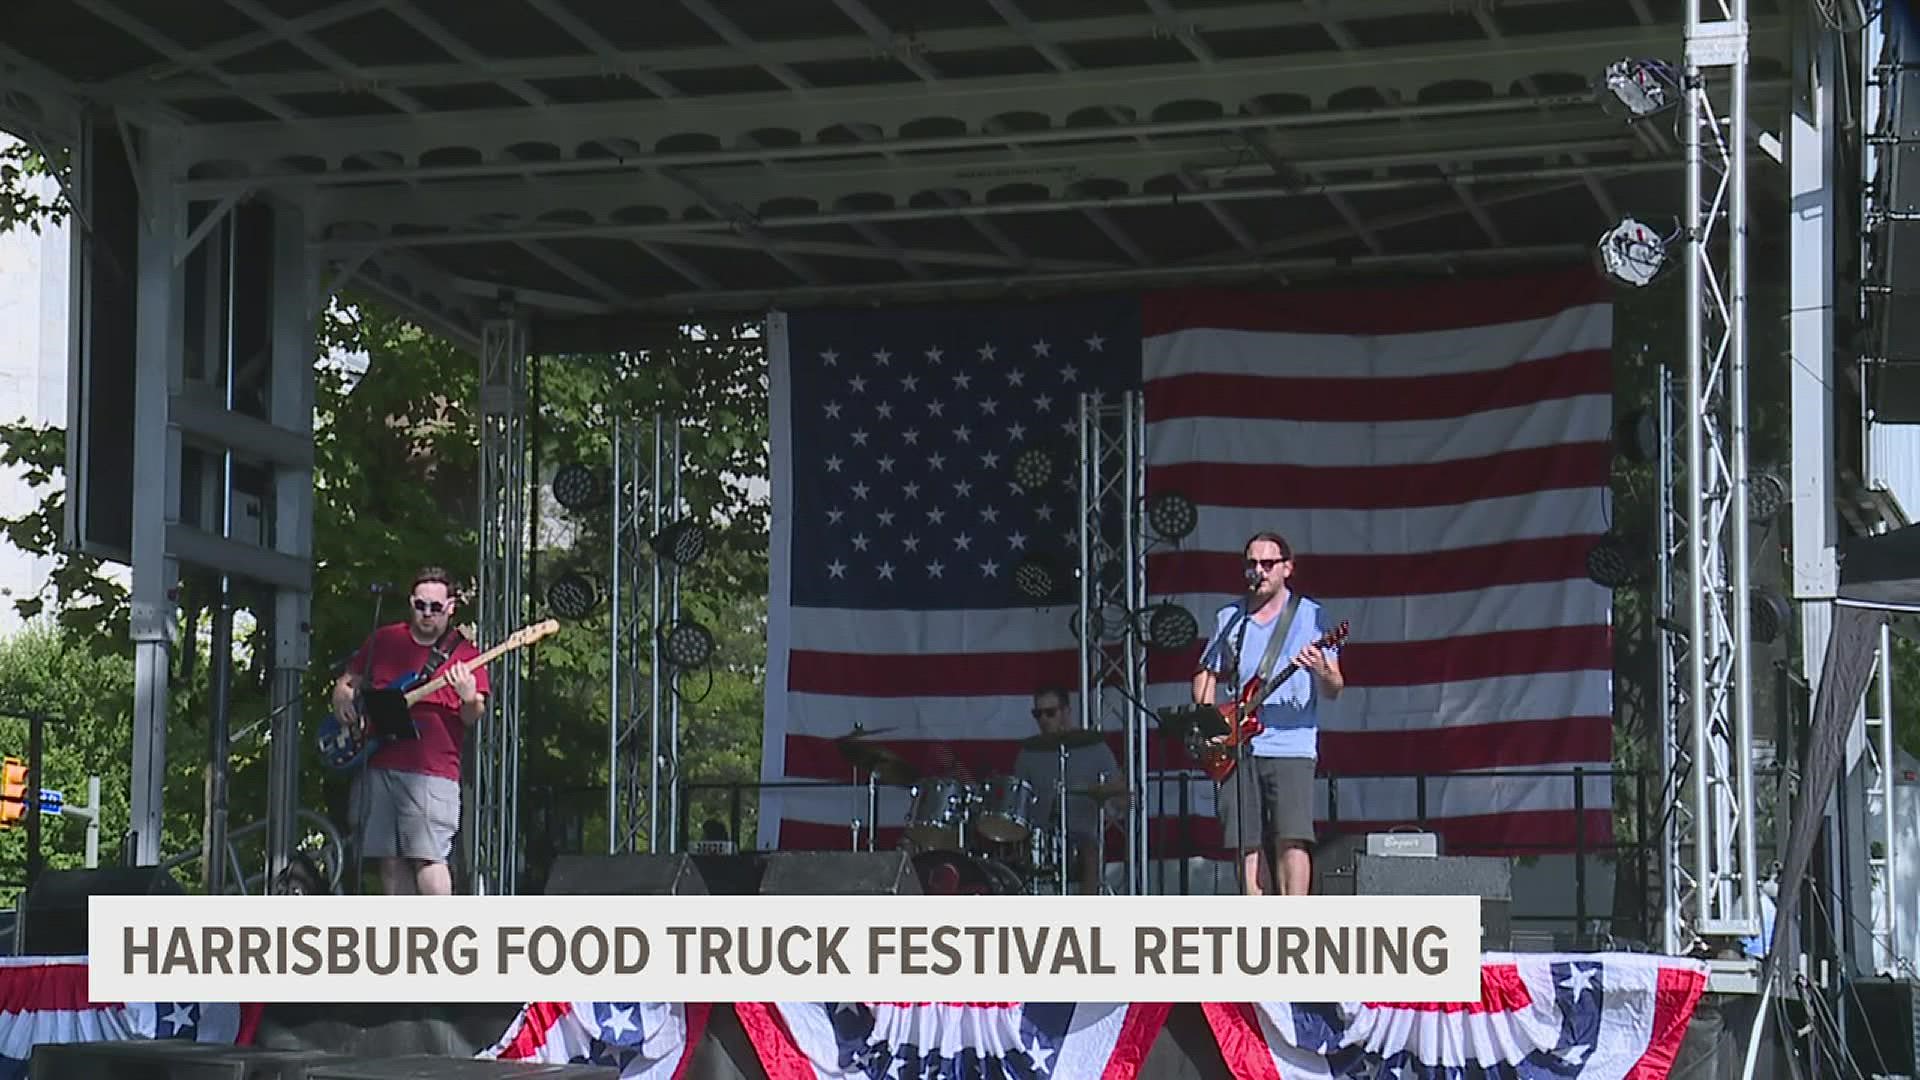 More than 45 food trucks will line Front Street on Monday, July 4th.